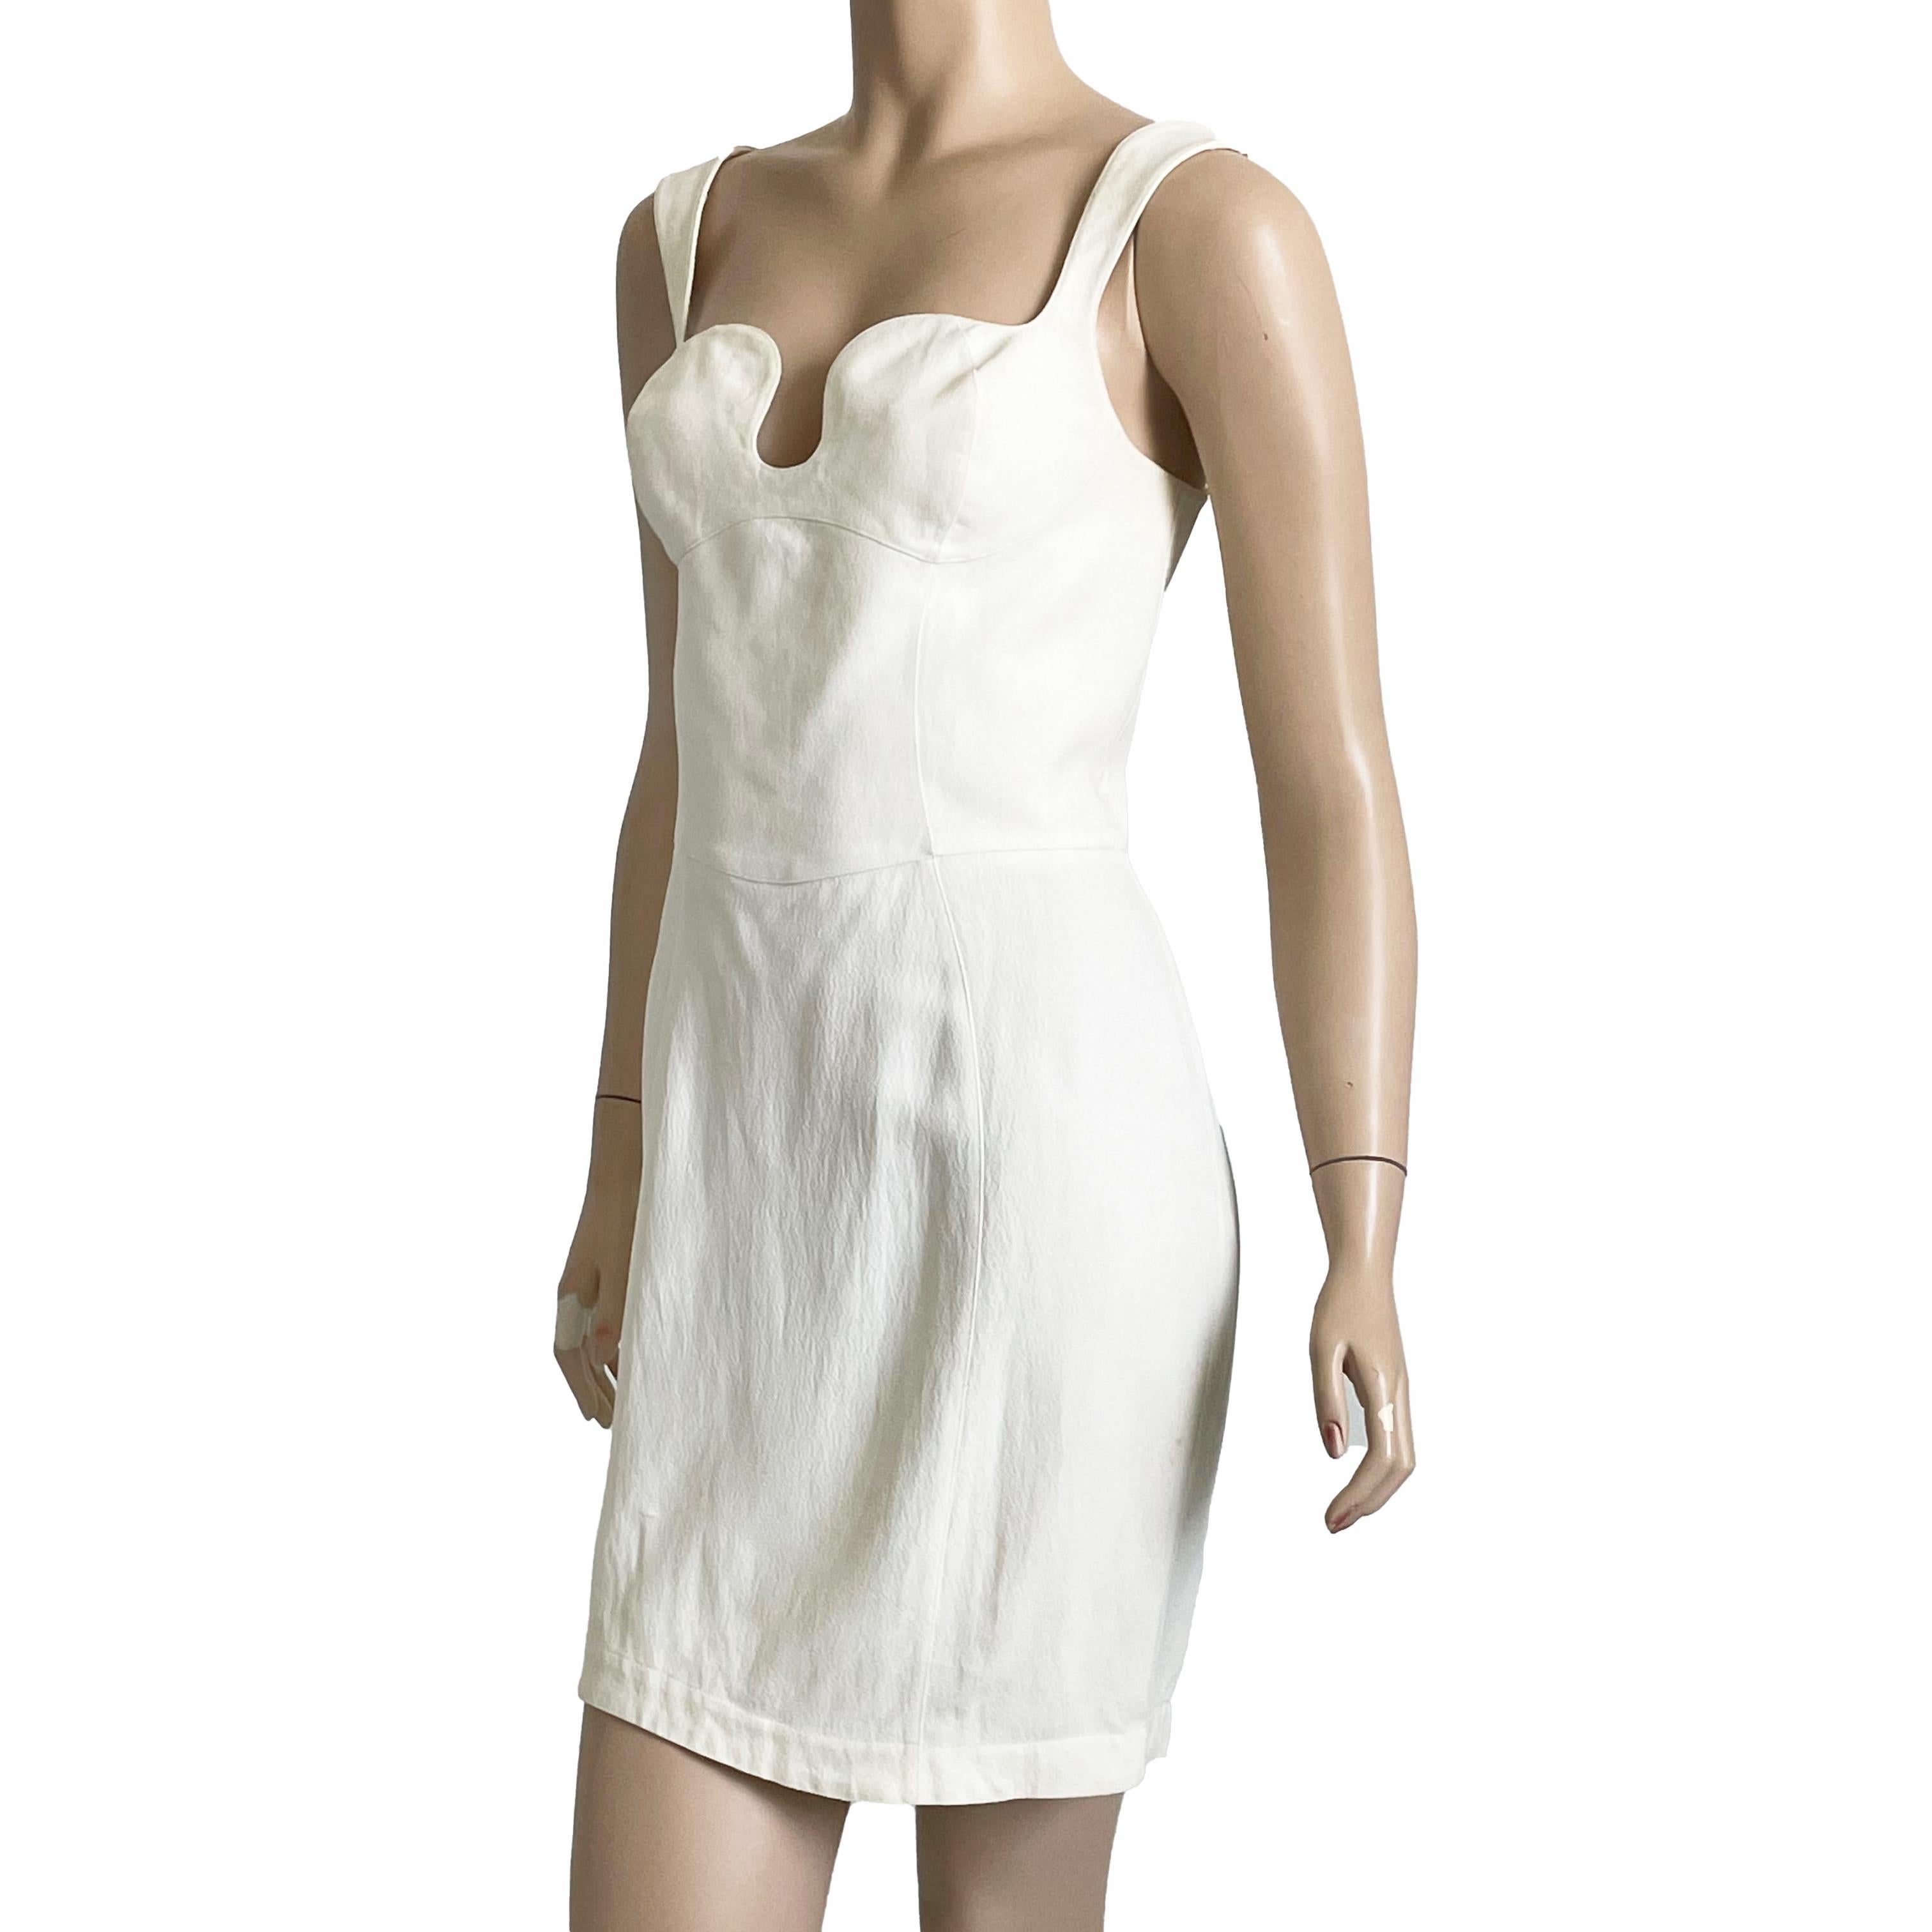 Thierry Mugler Cocktail Dress White Crepe Sculptural Chic Vintage 90s Sz 40 HTF For Sale 2